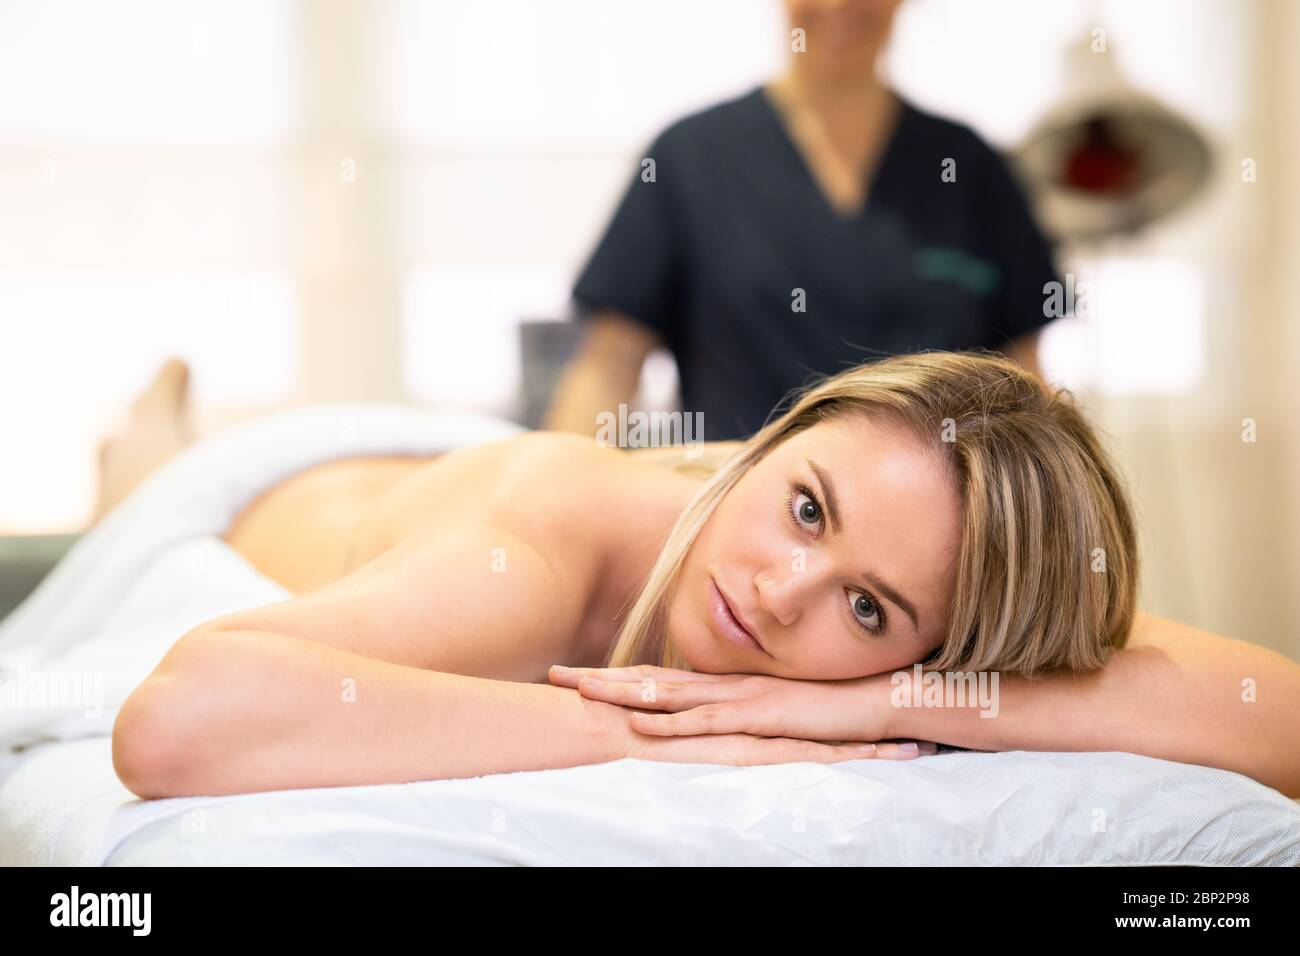 Woman lying on a stretcher at a physical therapy center. Stock Photo